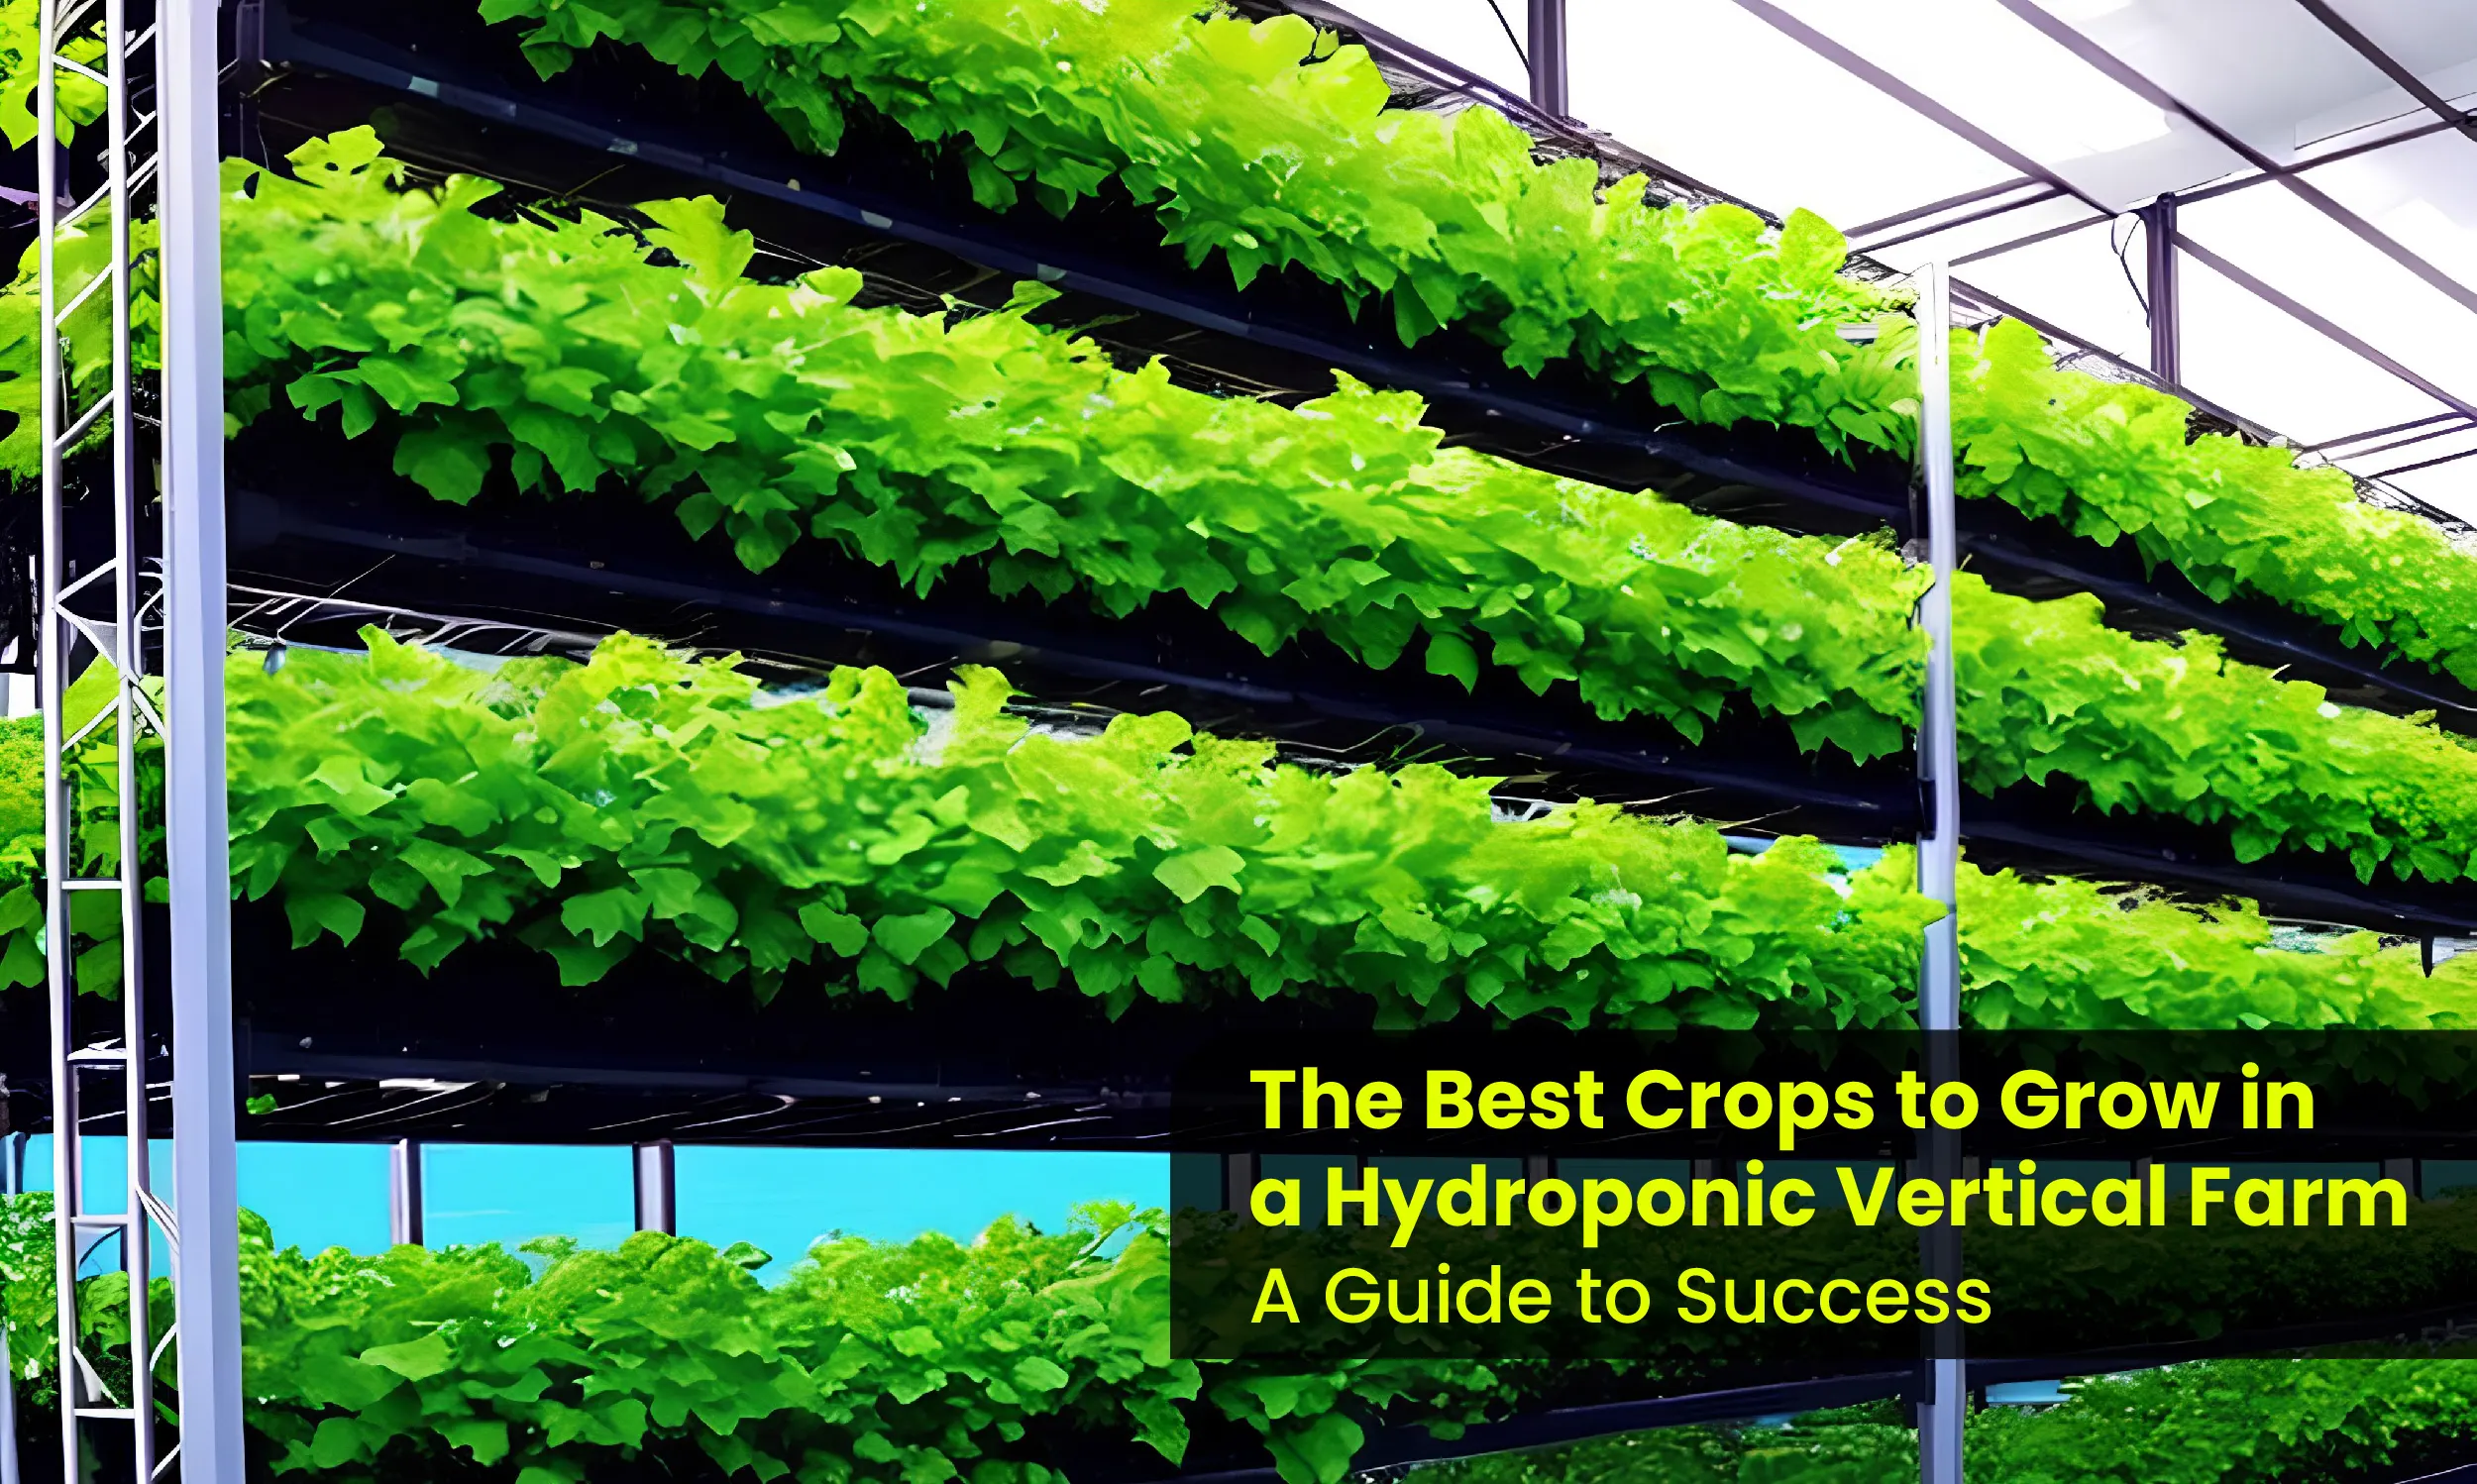 Best Crops to Grow in a Hydroponic Vertical Farm